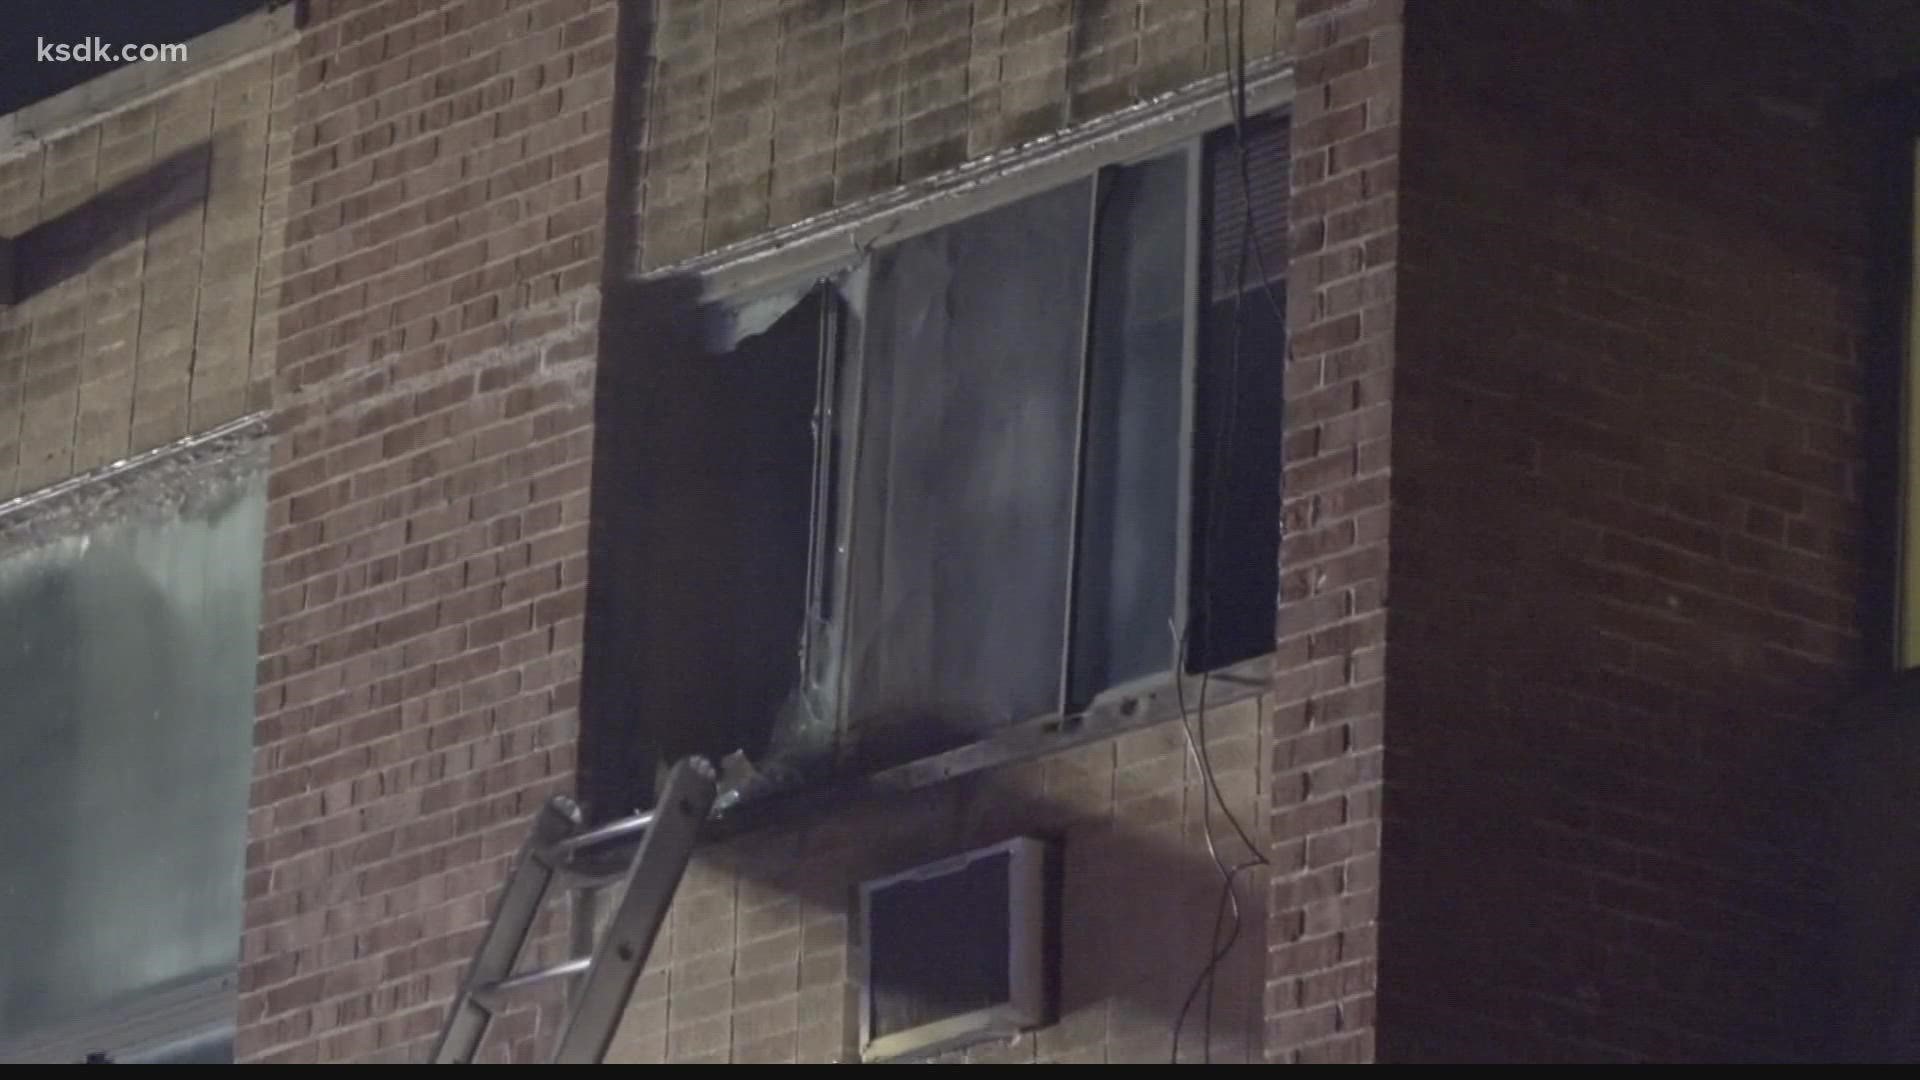 Three people were rescued from the third-story window, including a 6-year-old. They are expected to be OK.